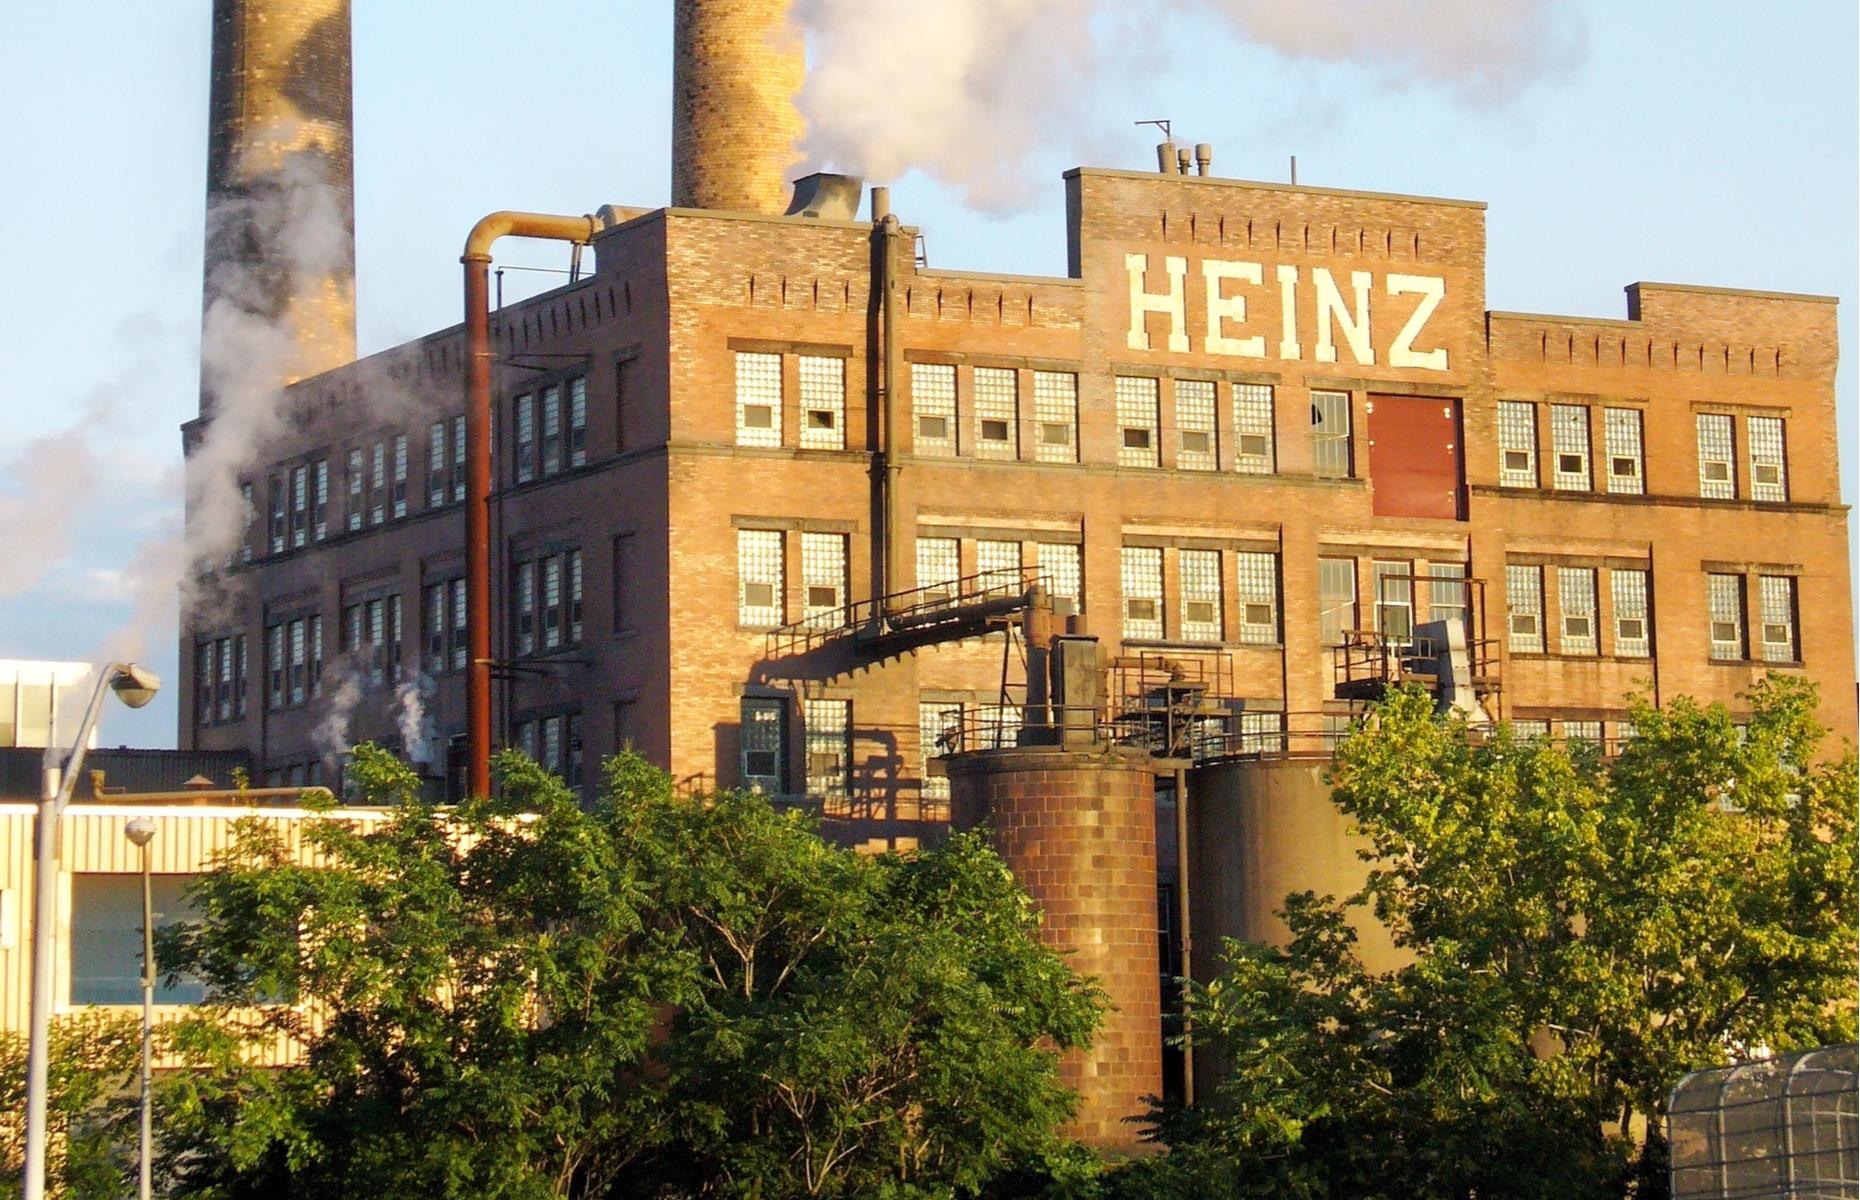 Lea & Perrins joins the Heinz family